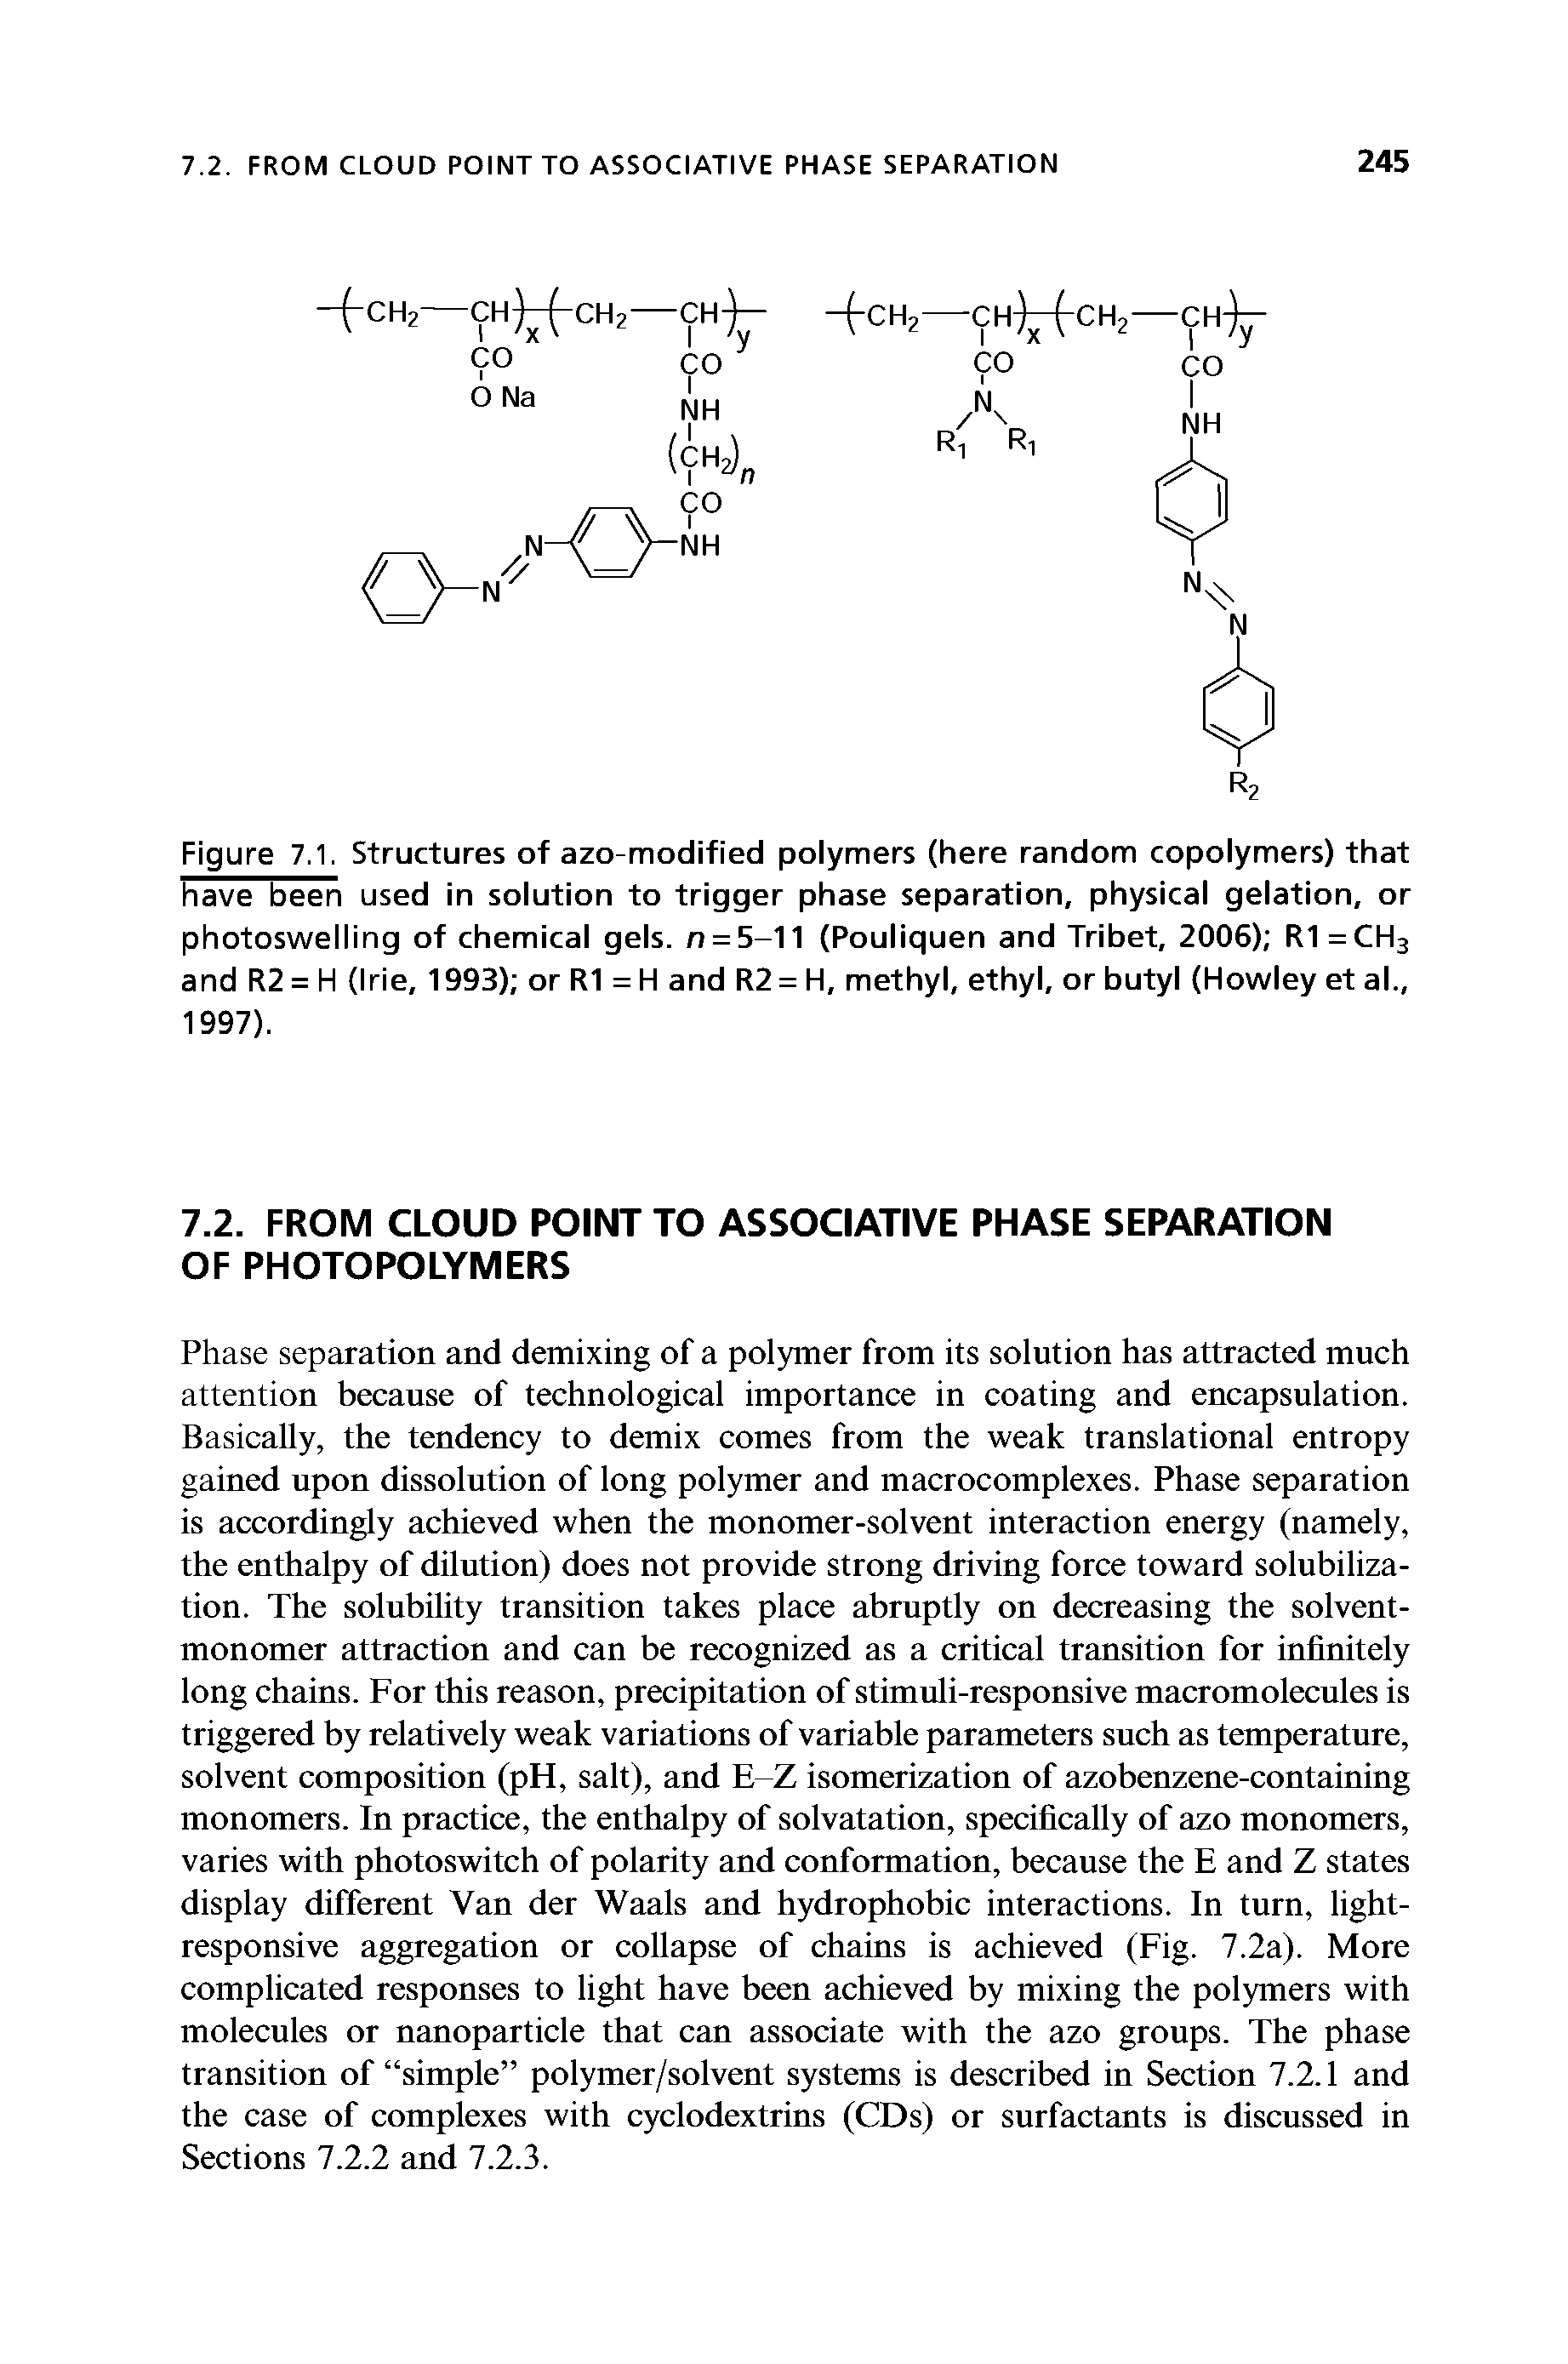 Figure 7.1. Structures of azo-modified polymers (here random copolymers) that have been used in solution to trigger phase separation, physical gelation, or photoswelling of chemical gels. n = 5-11 (Pouliquen and Tribet, 2006) RI =CH3 and R2 = H (Irie, 1993) or RI = H and R2 = H, methyl, ethyl, or butyl (Howley et al., 1997).